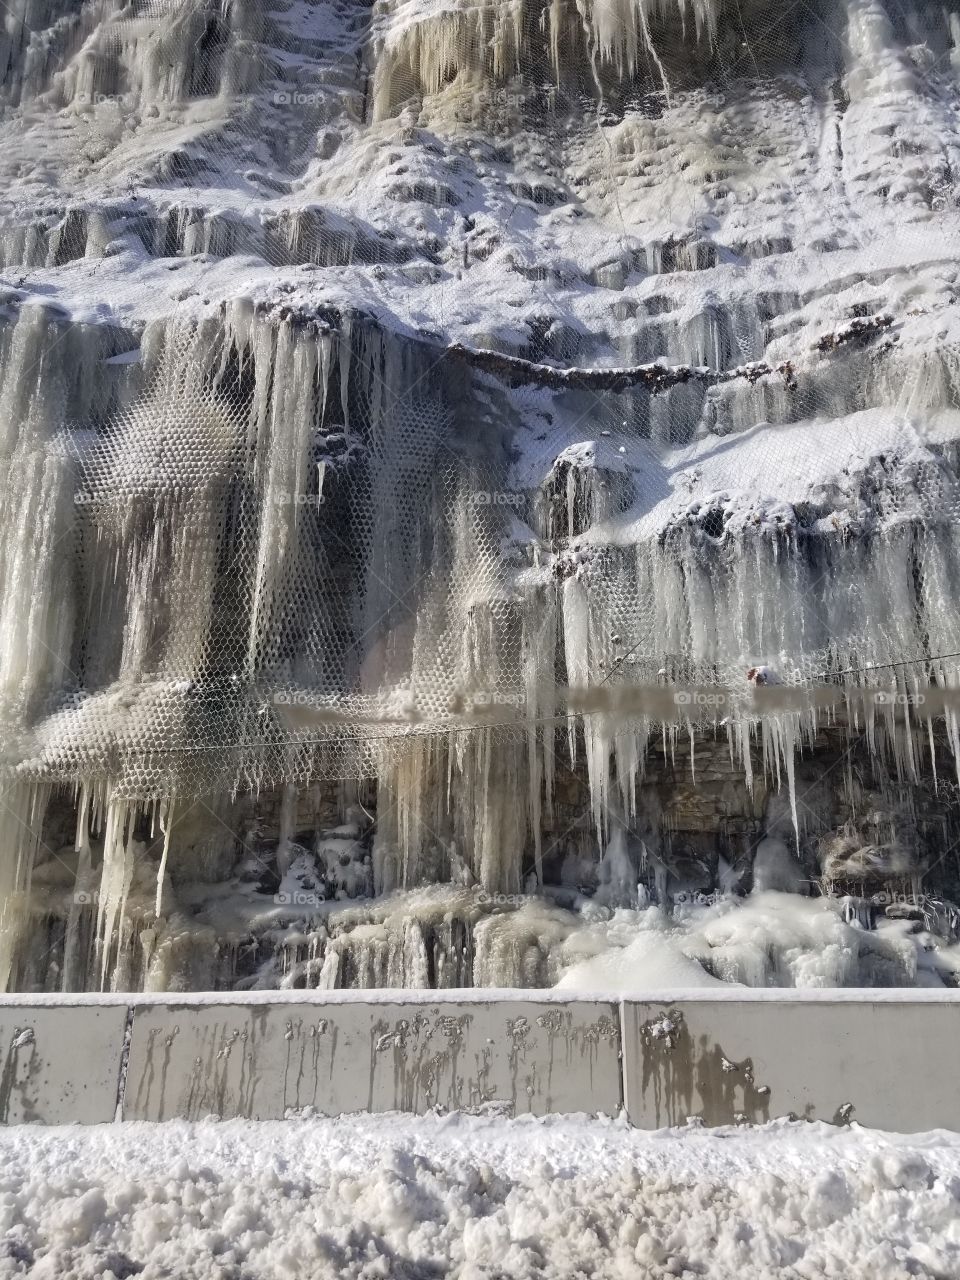 Frozen water creating the look of a frozen waterfall on a mountain-side with a chain link fence to prevent the dangers of fallen rocks.